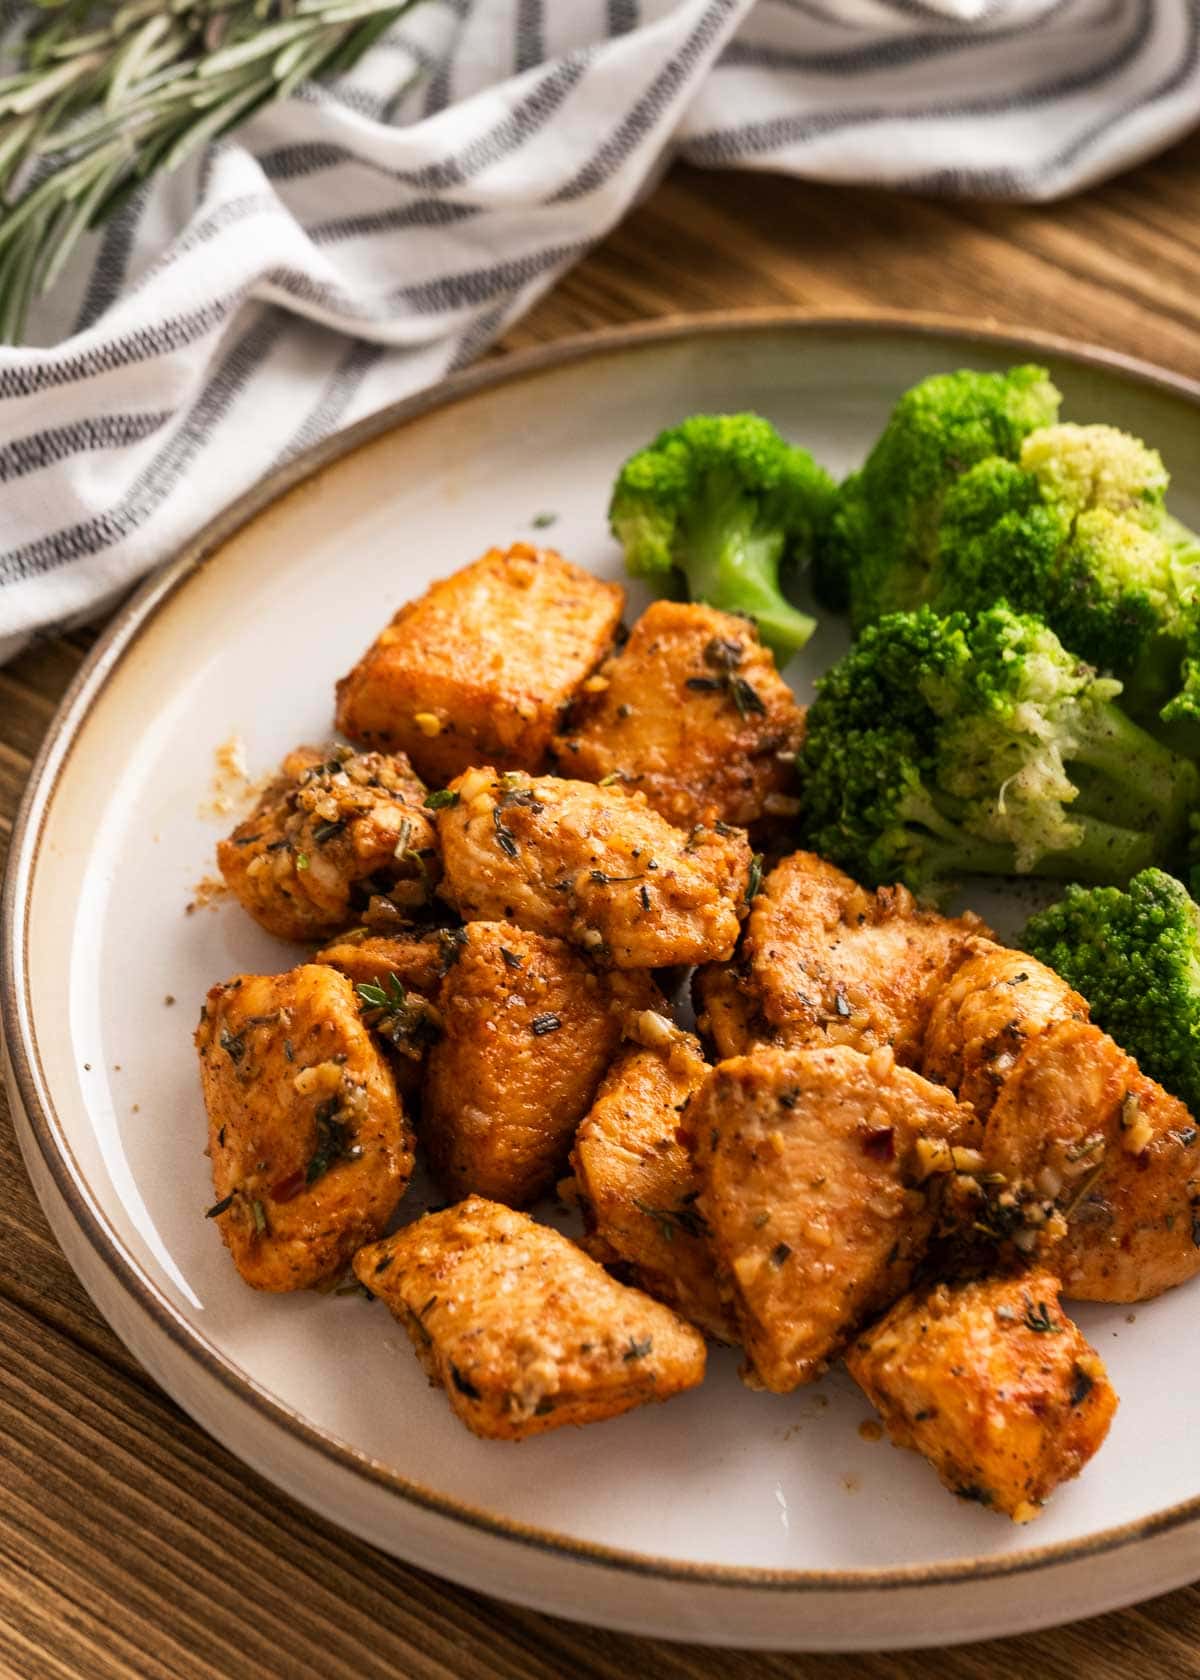 garlic butter chicken bites and broccoli on a white plate